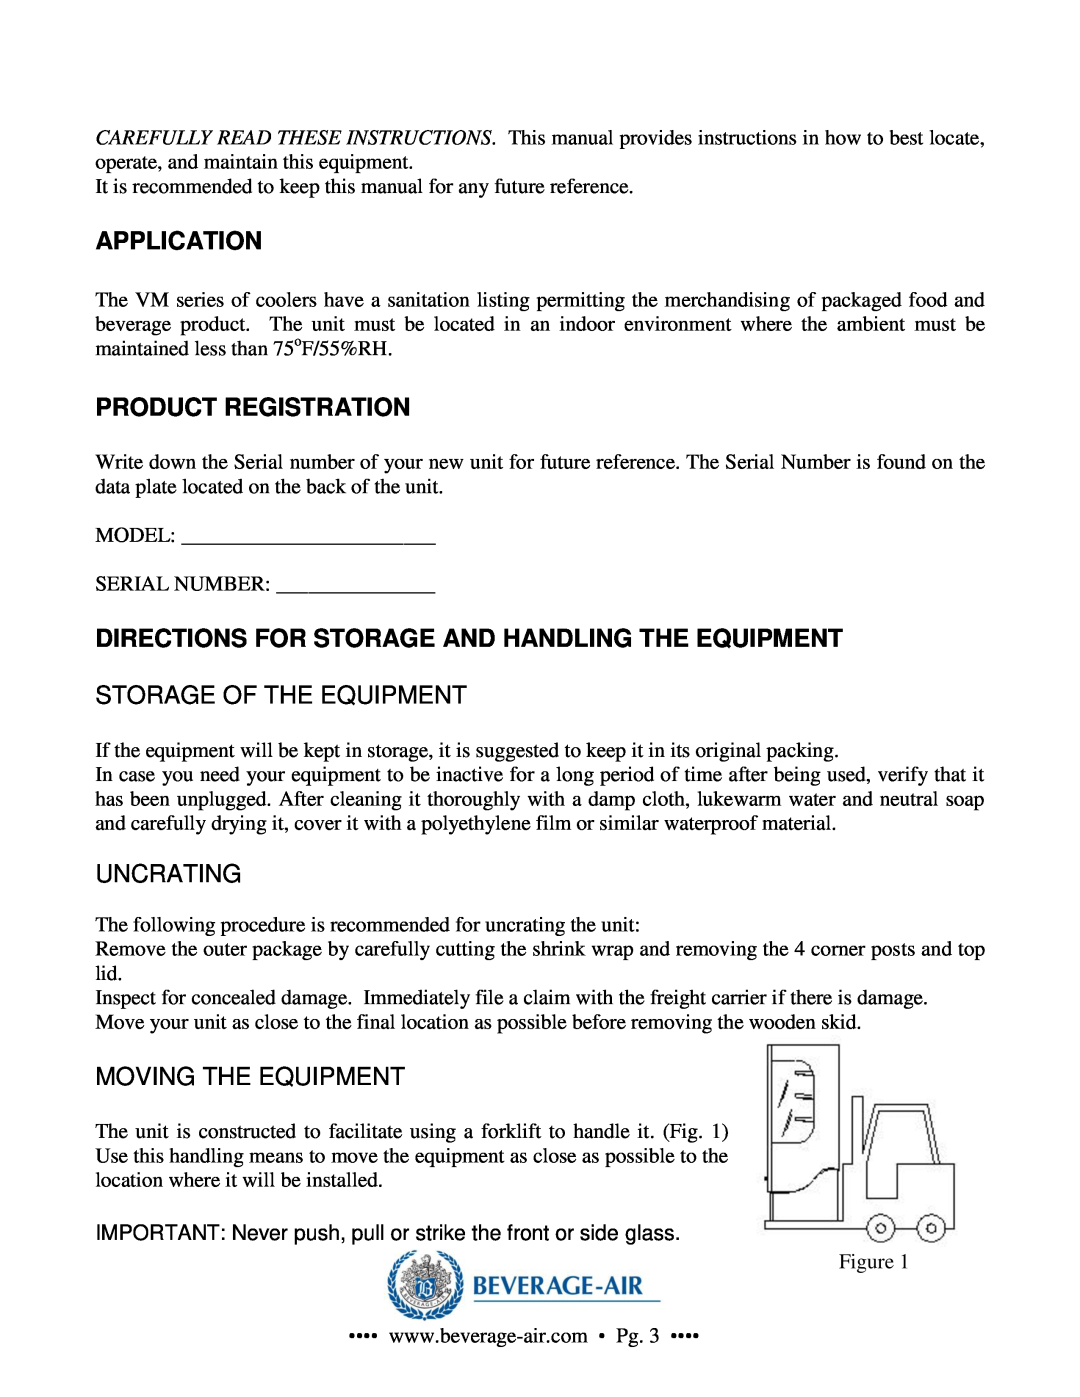 Beverage-Air VM12, VM2, VM7 Application, Product Registration, Directions For Storage And Handling The Equipment, Uncrating 